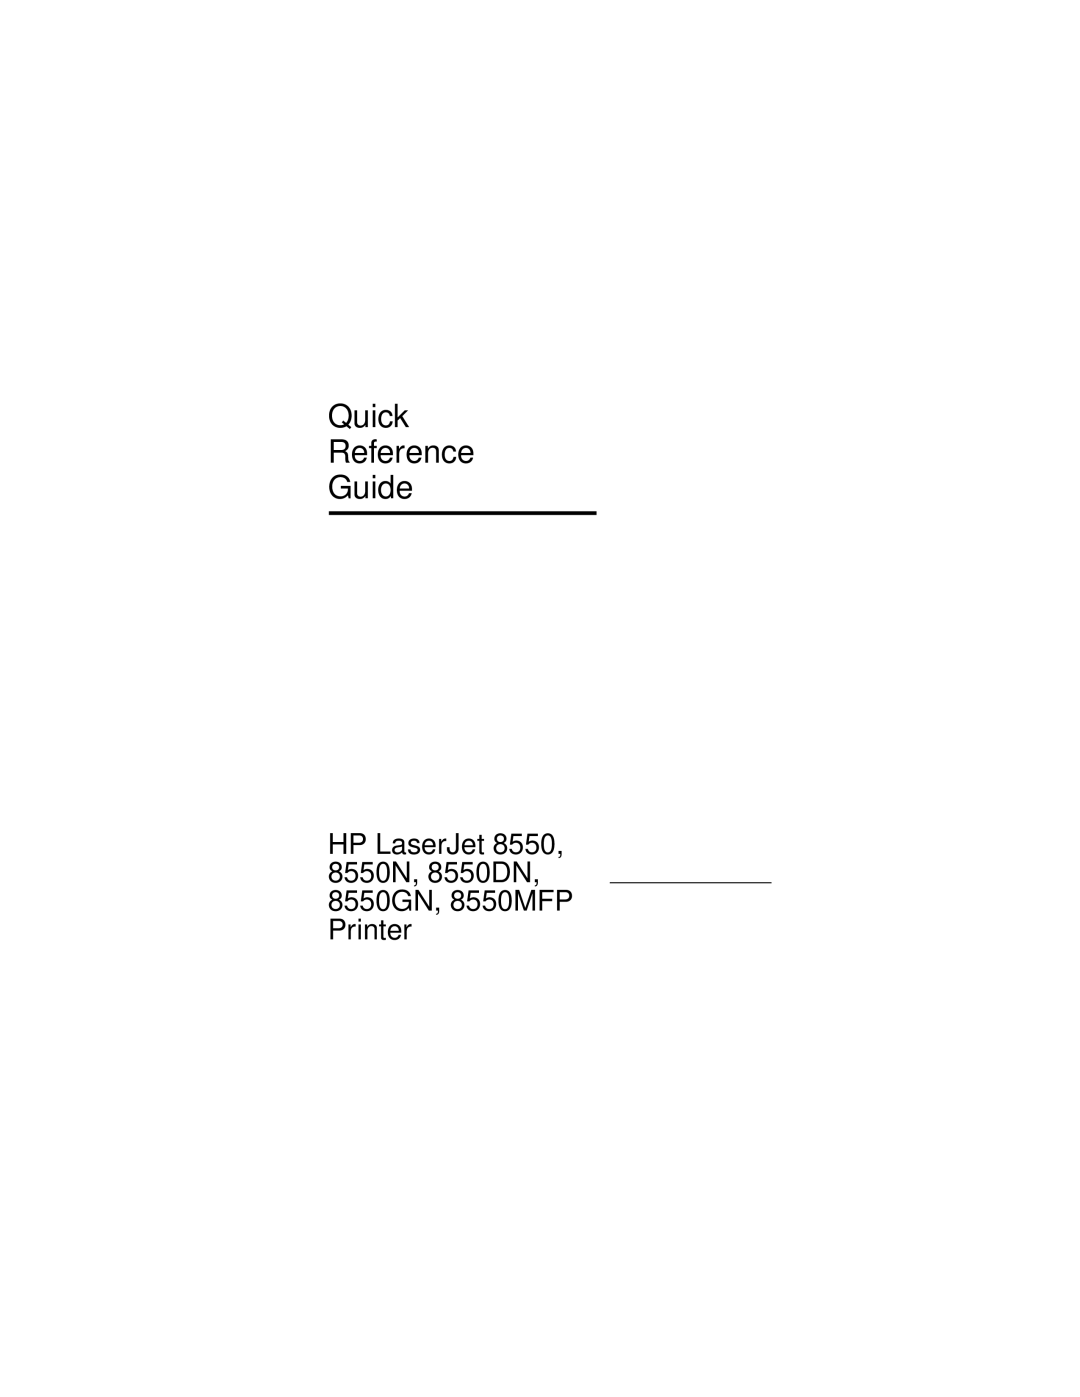 HP 8000 s manual Quick Reference Guide, HP LaserJet 8550, 8550N, 8550DN, 8550GN, 8550MFP Printer 